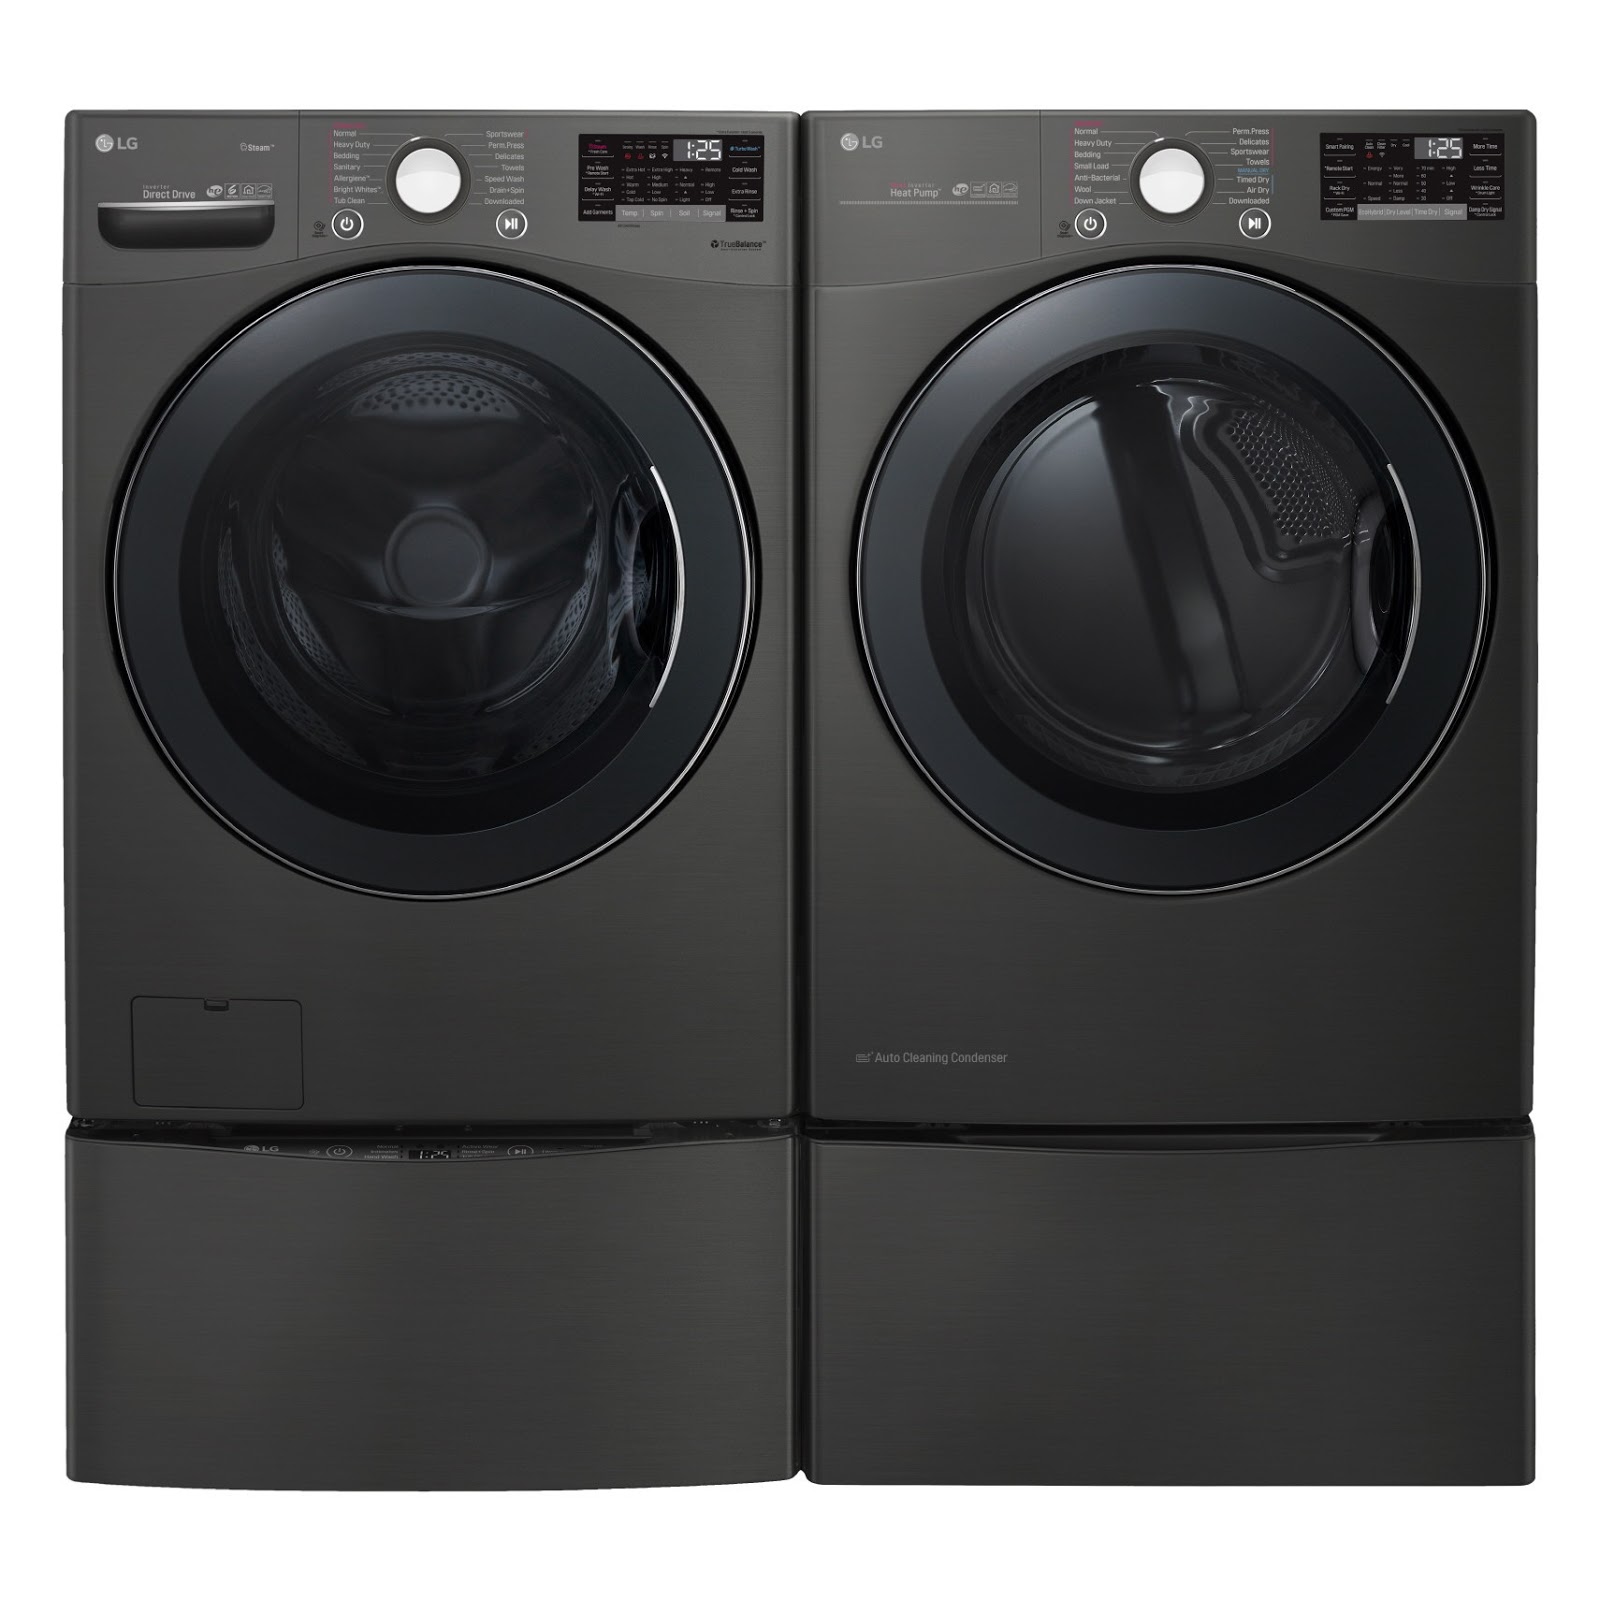 New Big Capacity LG TWINWash And Dryer Sets New Standard For Laundry